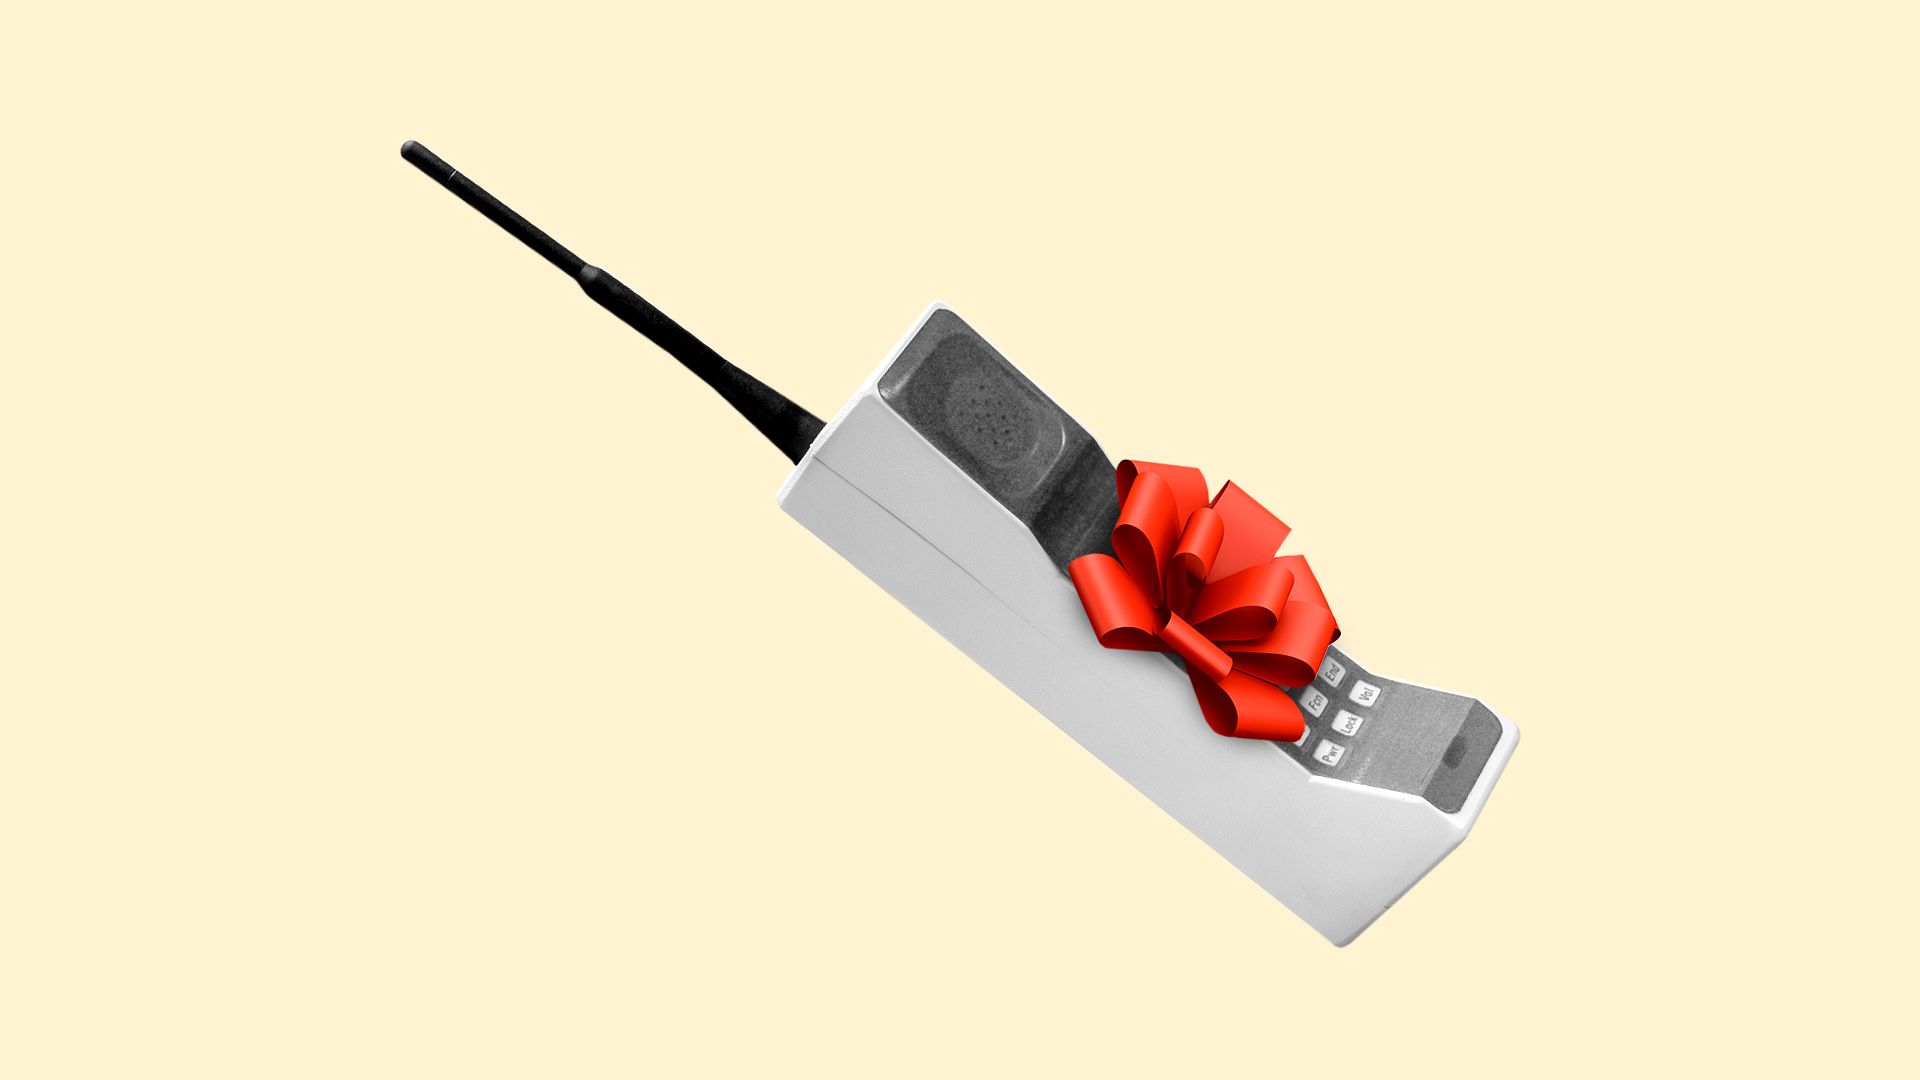 Illustration of an old brick cell phone with a ribbon